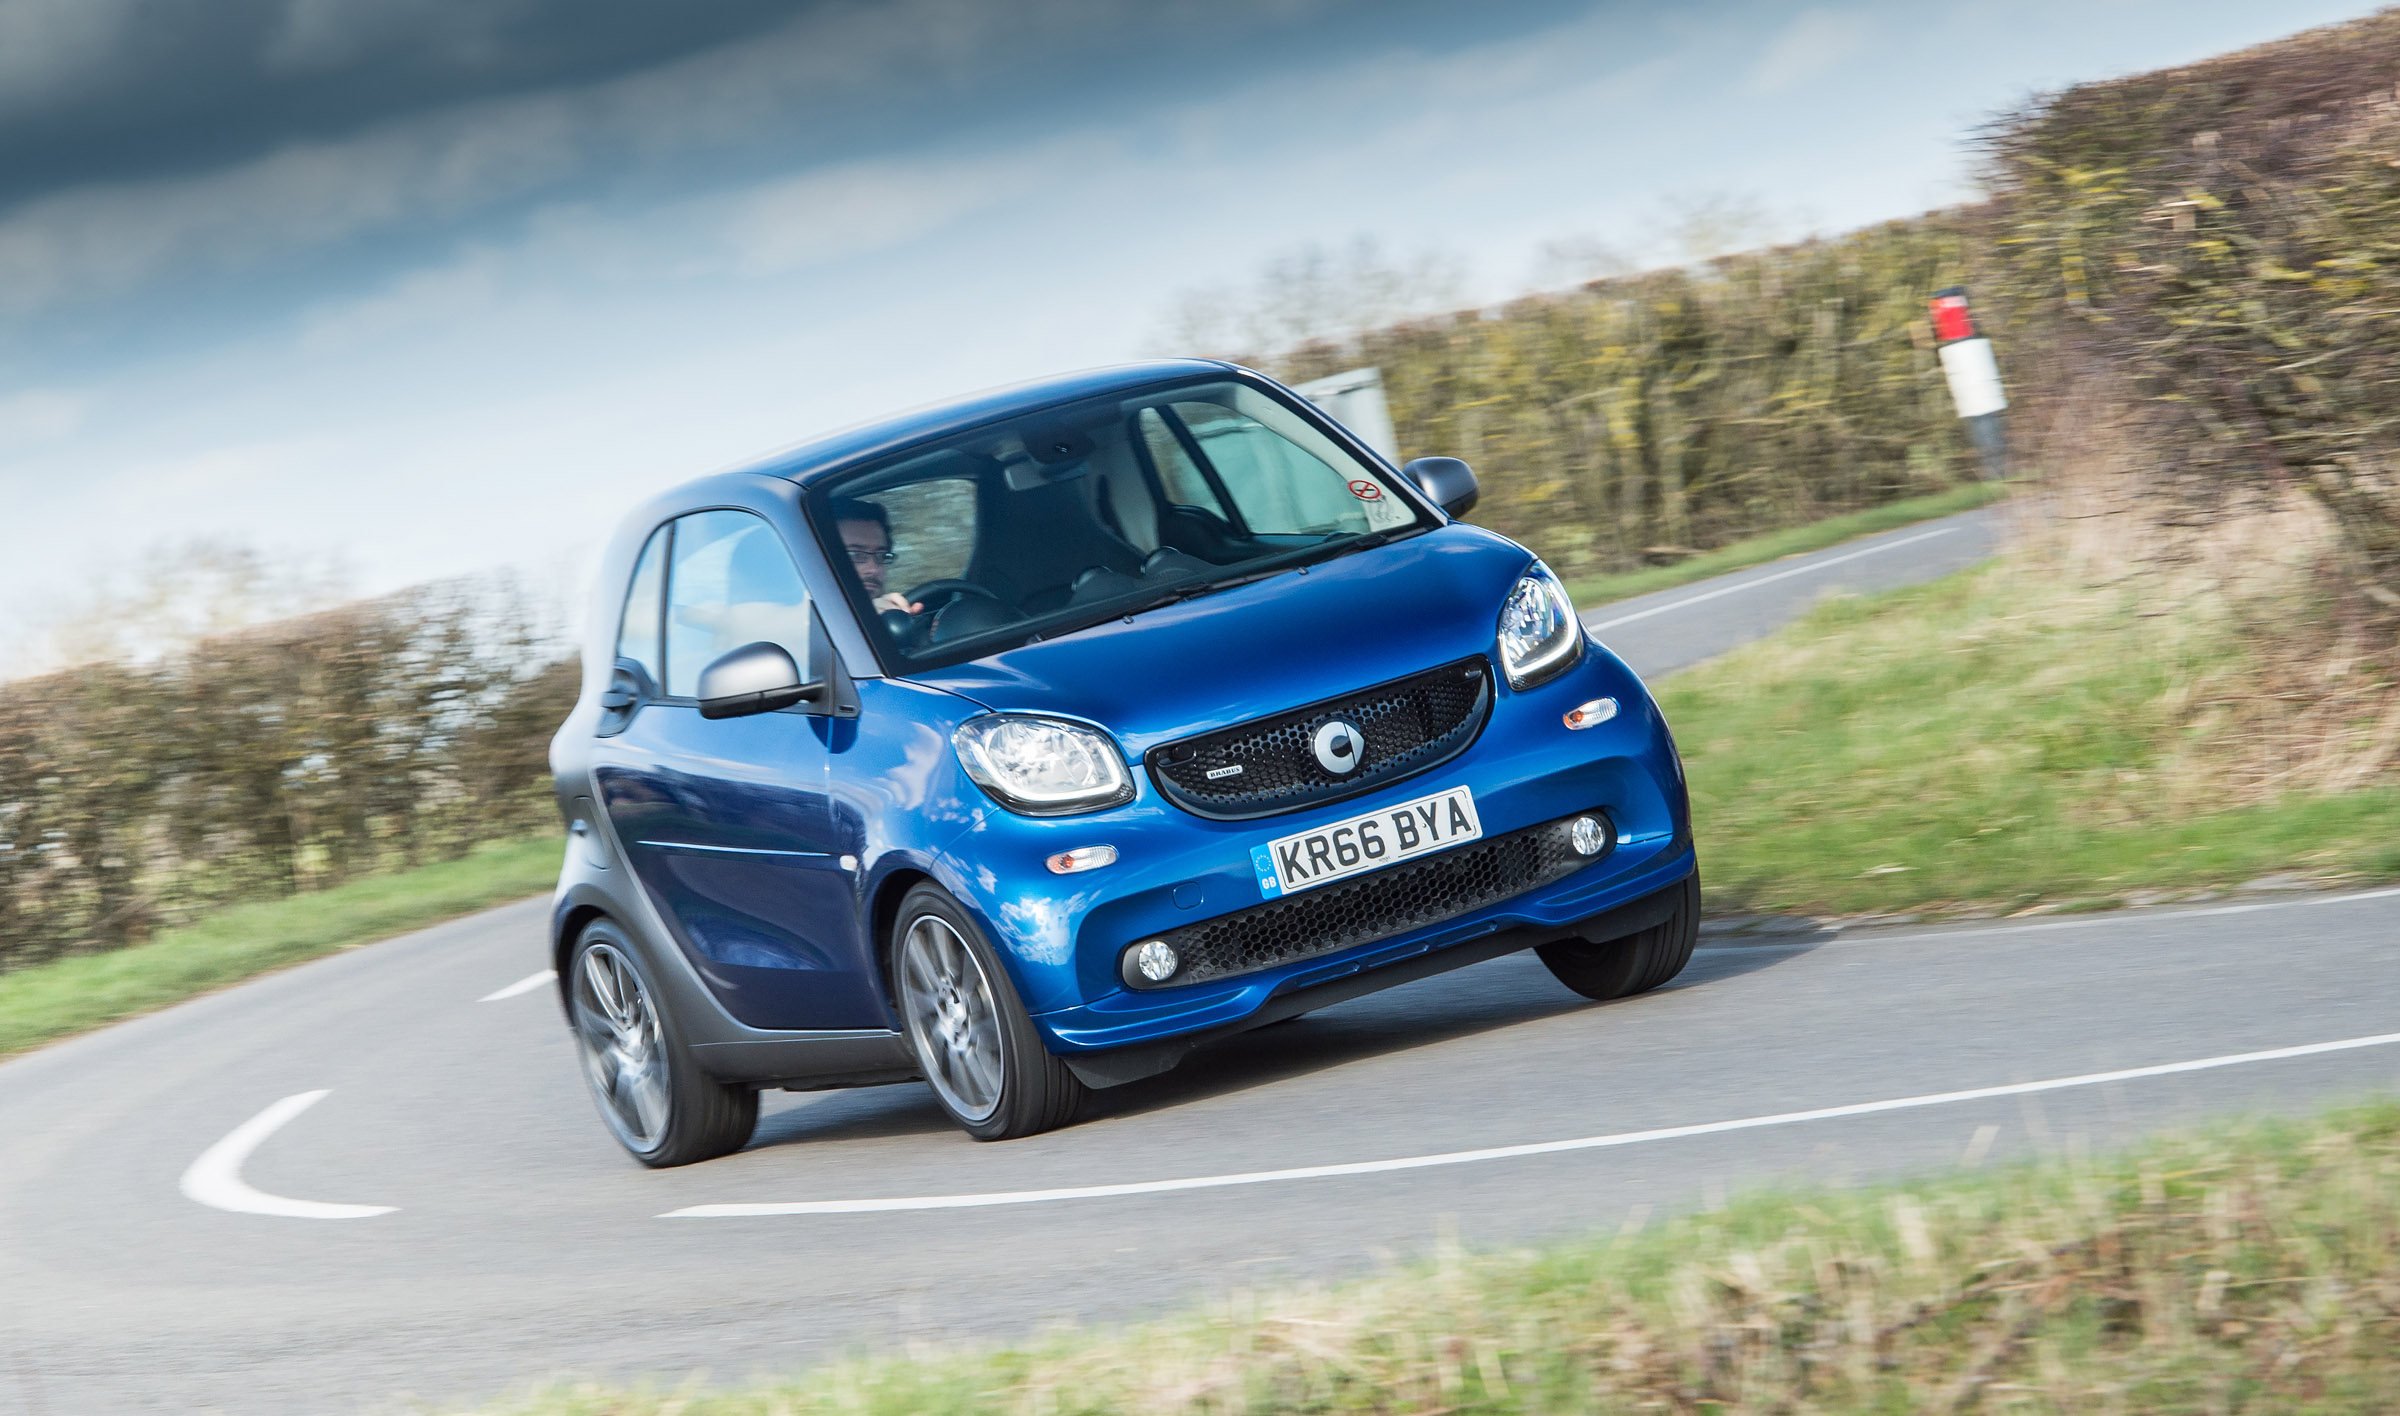 Smart Brabus Forfour review - prices, specs and 0-60 time